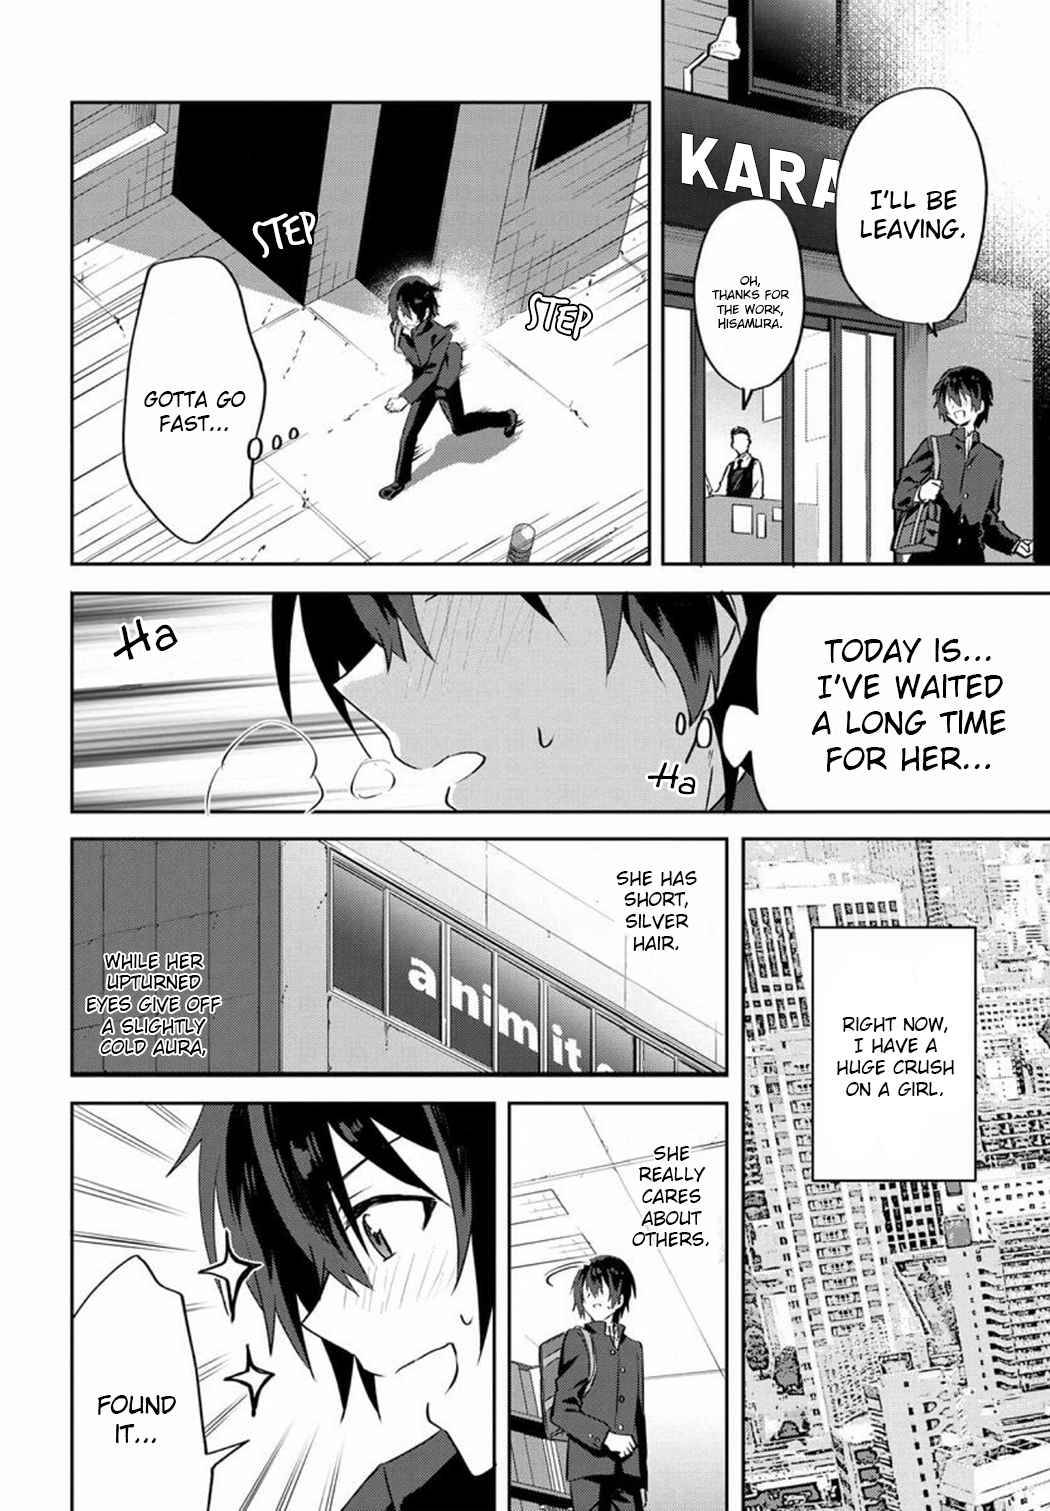 Since I’Ve Entered The World Of Romantic Comedy Manga, I’Ll Do My Best To Make The Losing Heroine Happy - chapter 1 - #3